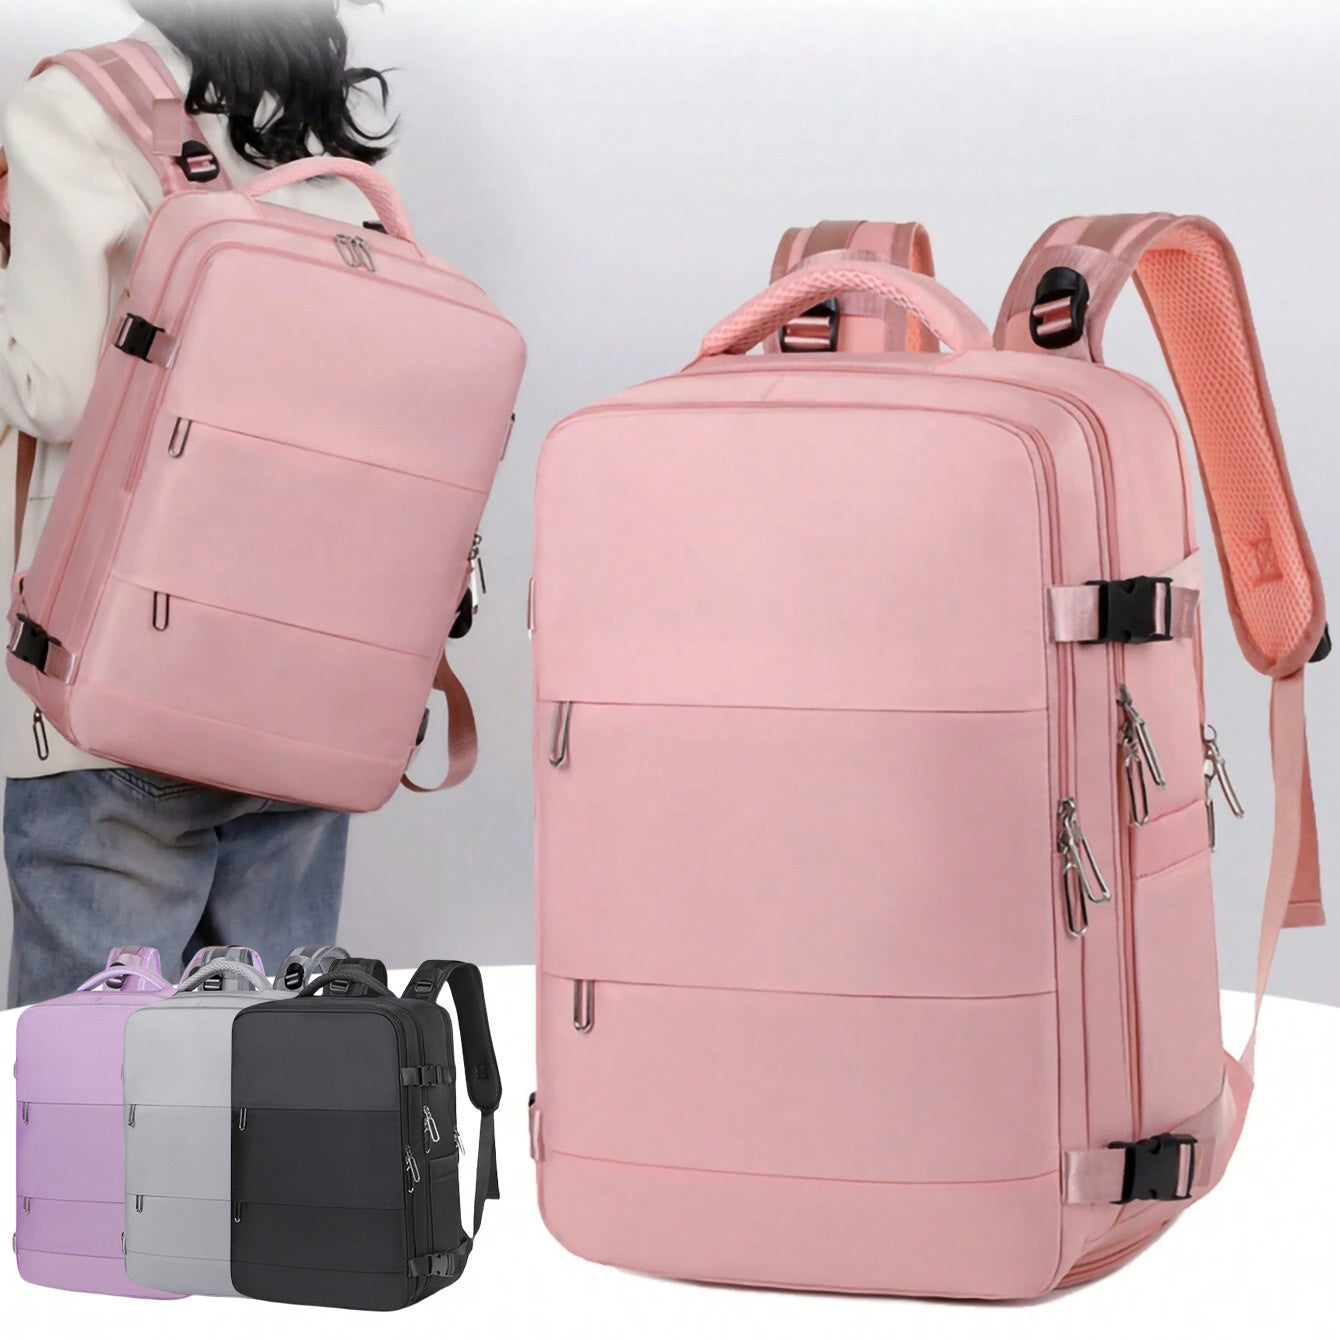 New Travel Backpack Female Large-capacity Dry And Wet Luggage Travel Bags The Khan Shop